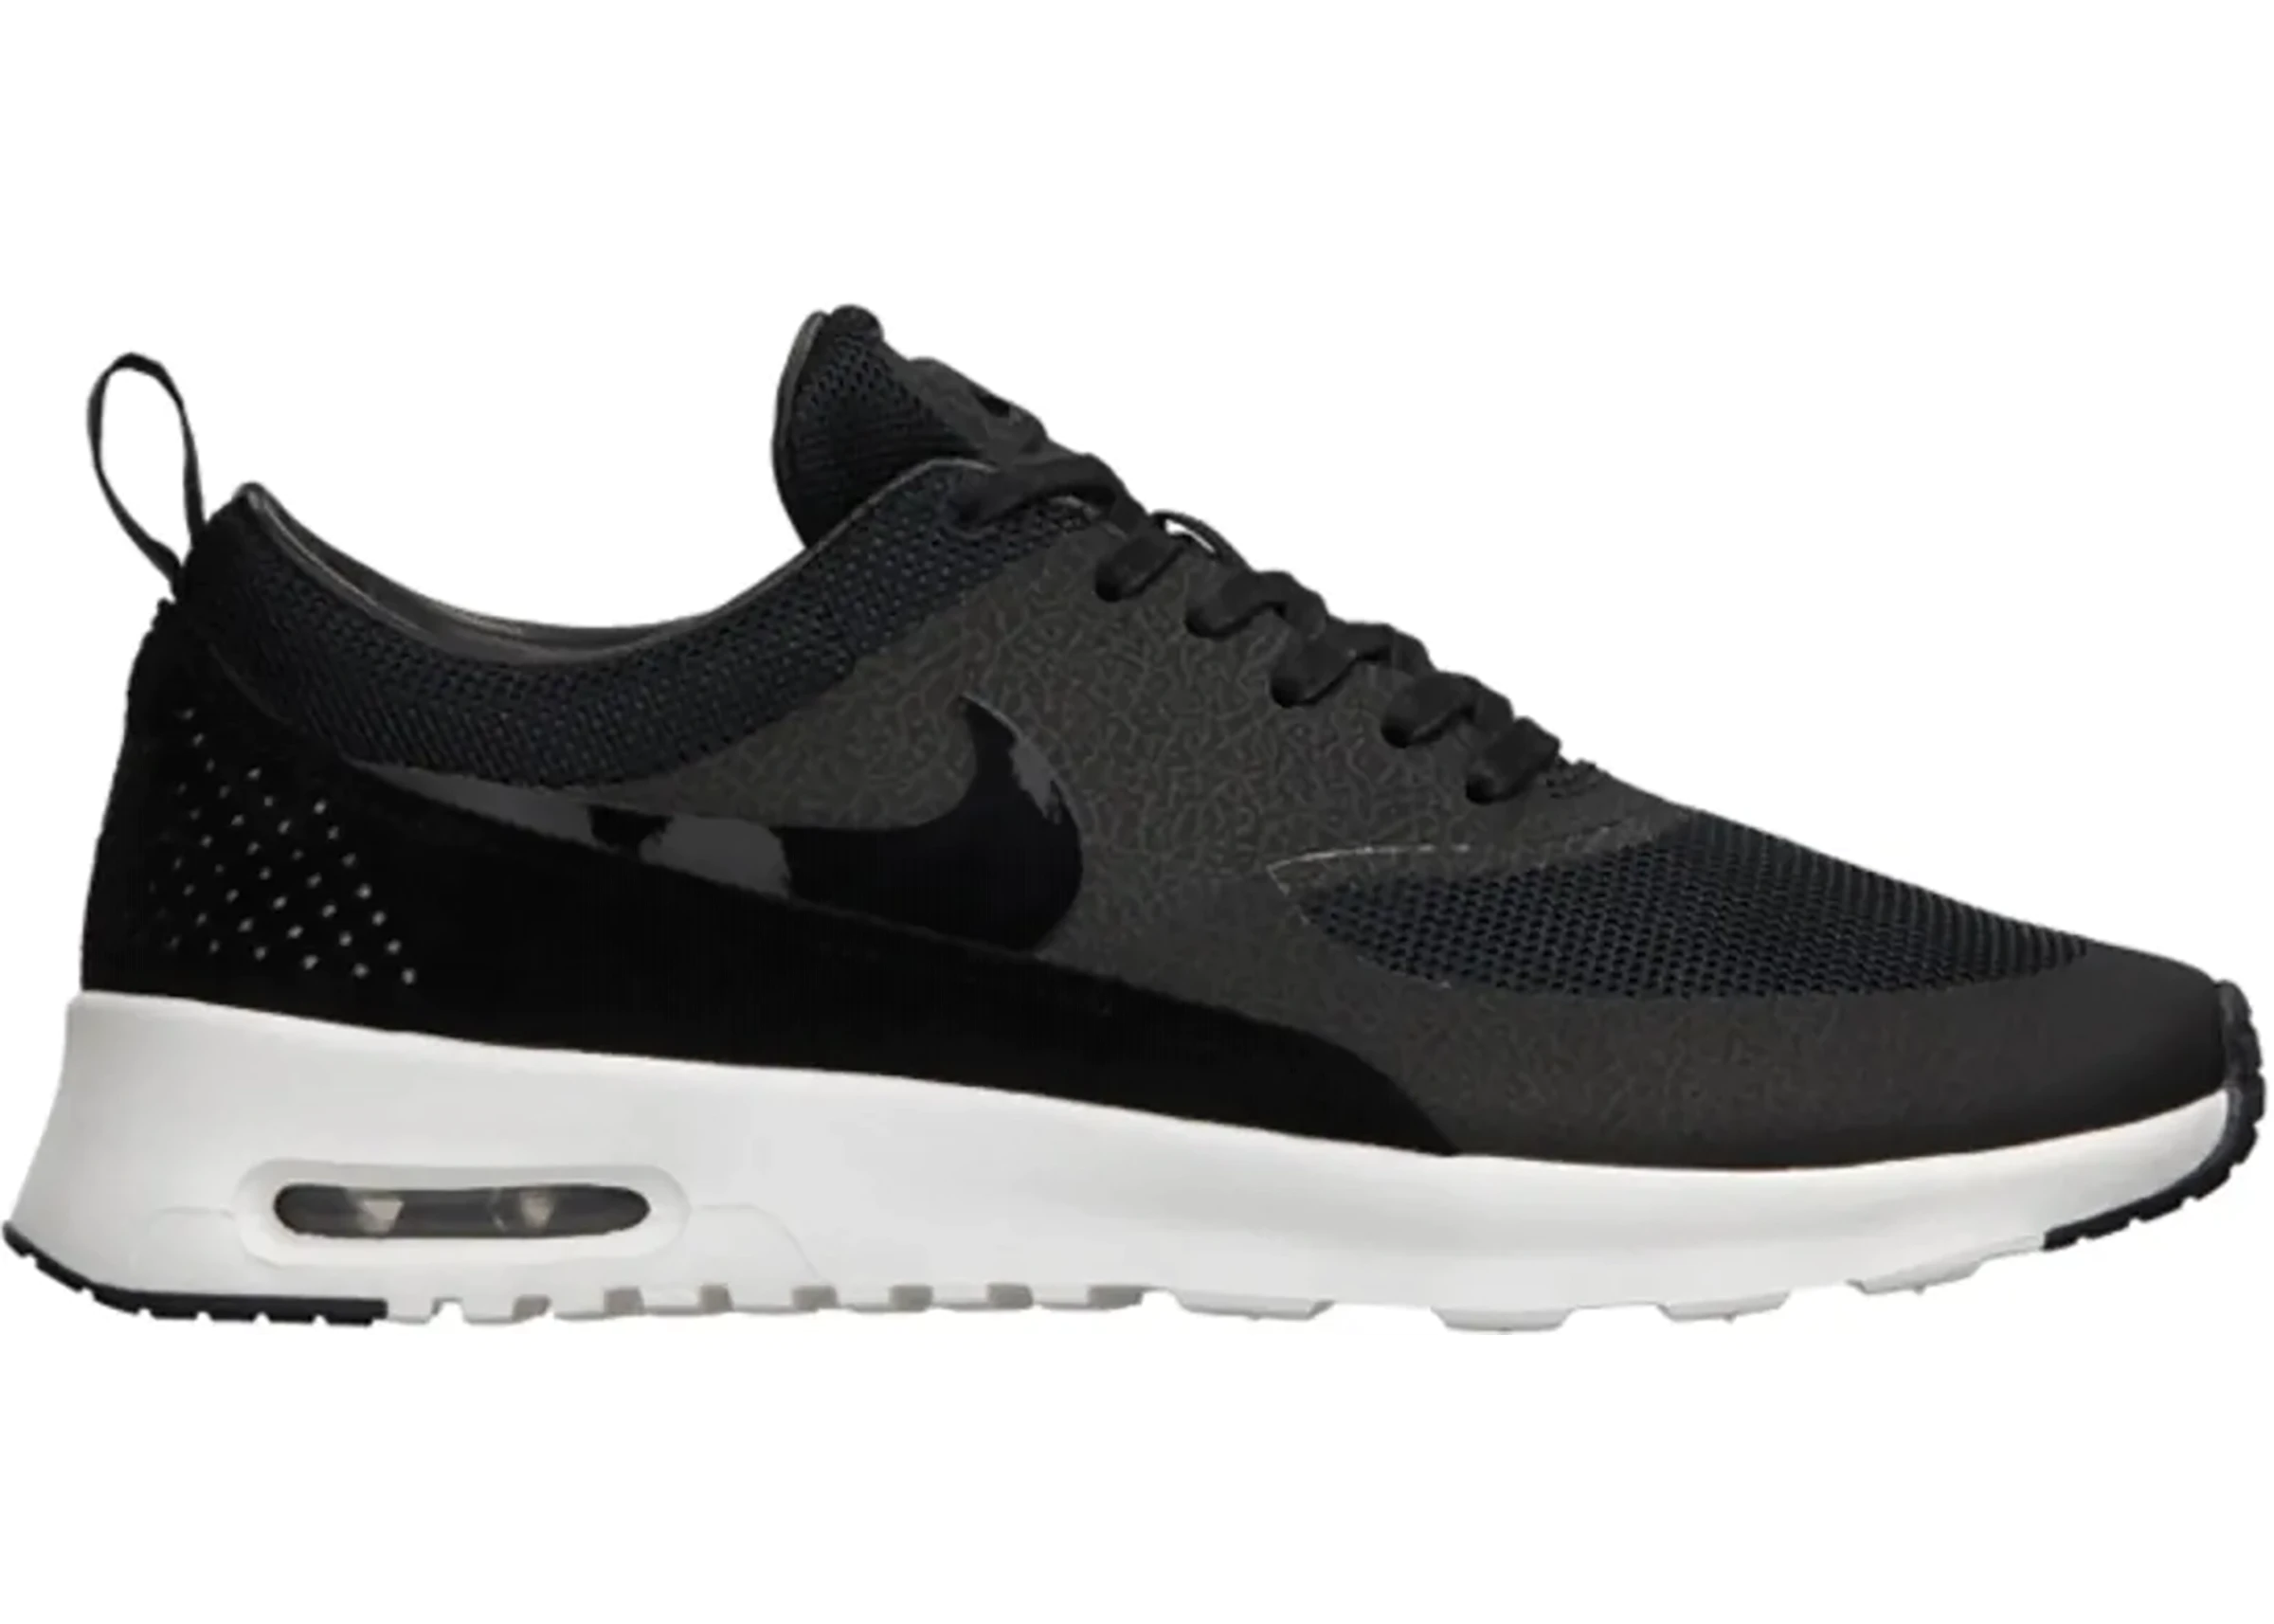 moat Net insurance Nike Air Max Thea Black Anthracite (W) - 618213-001 - US